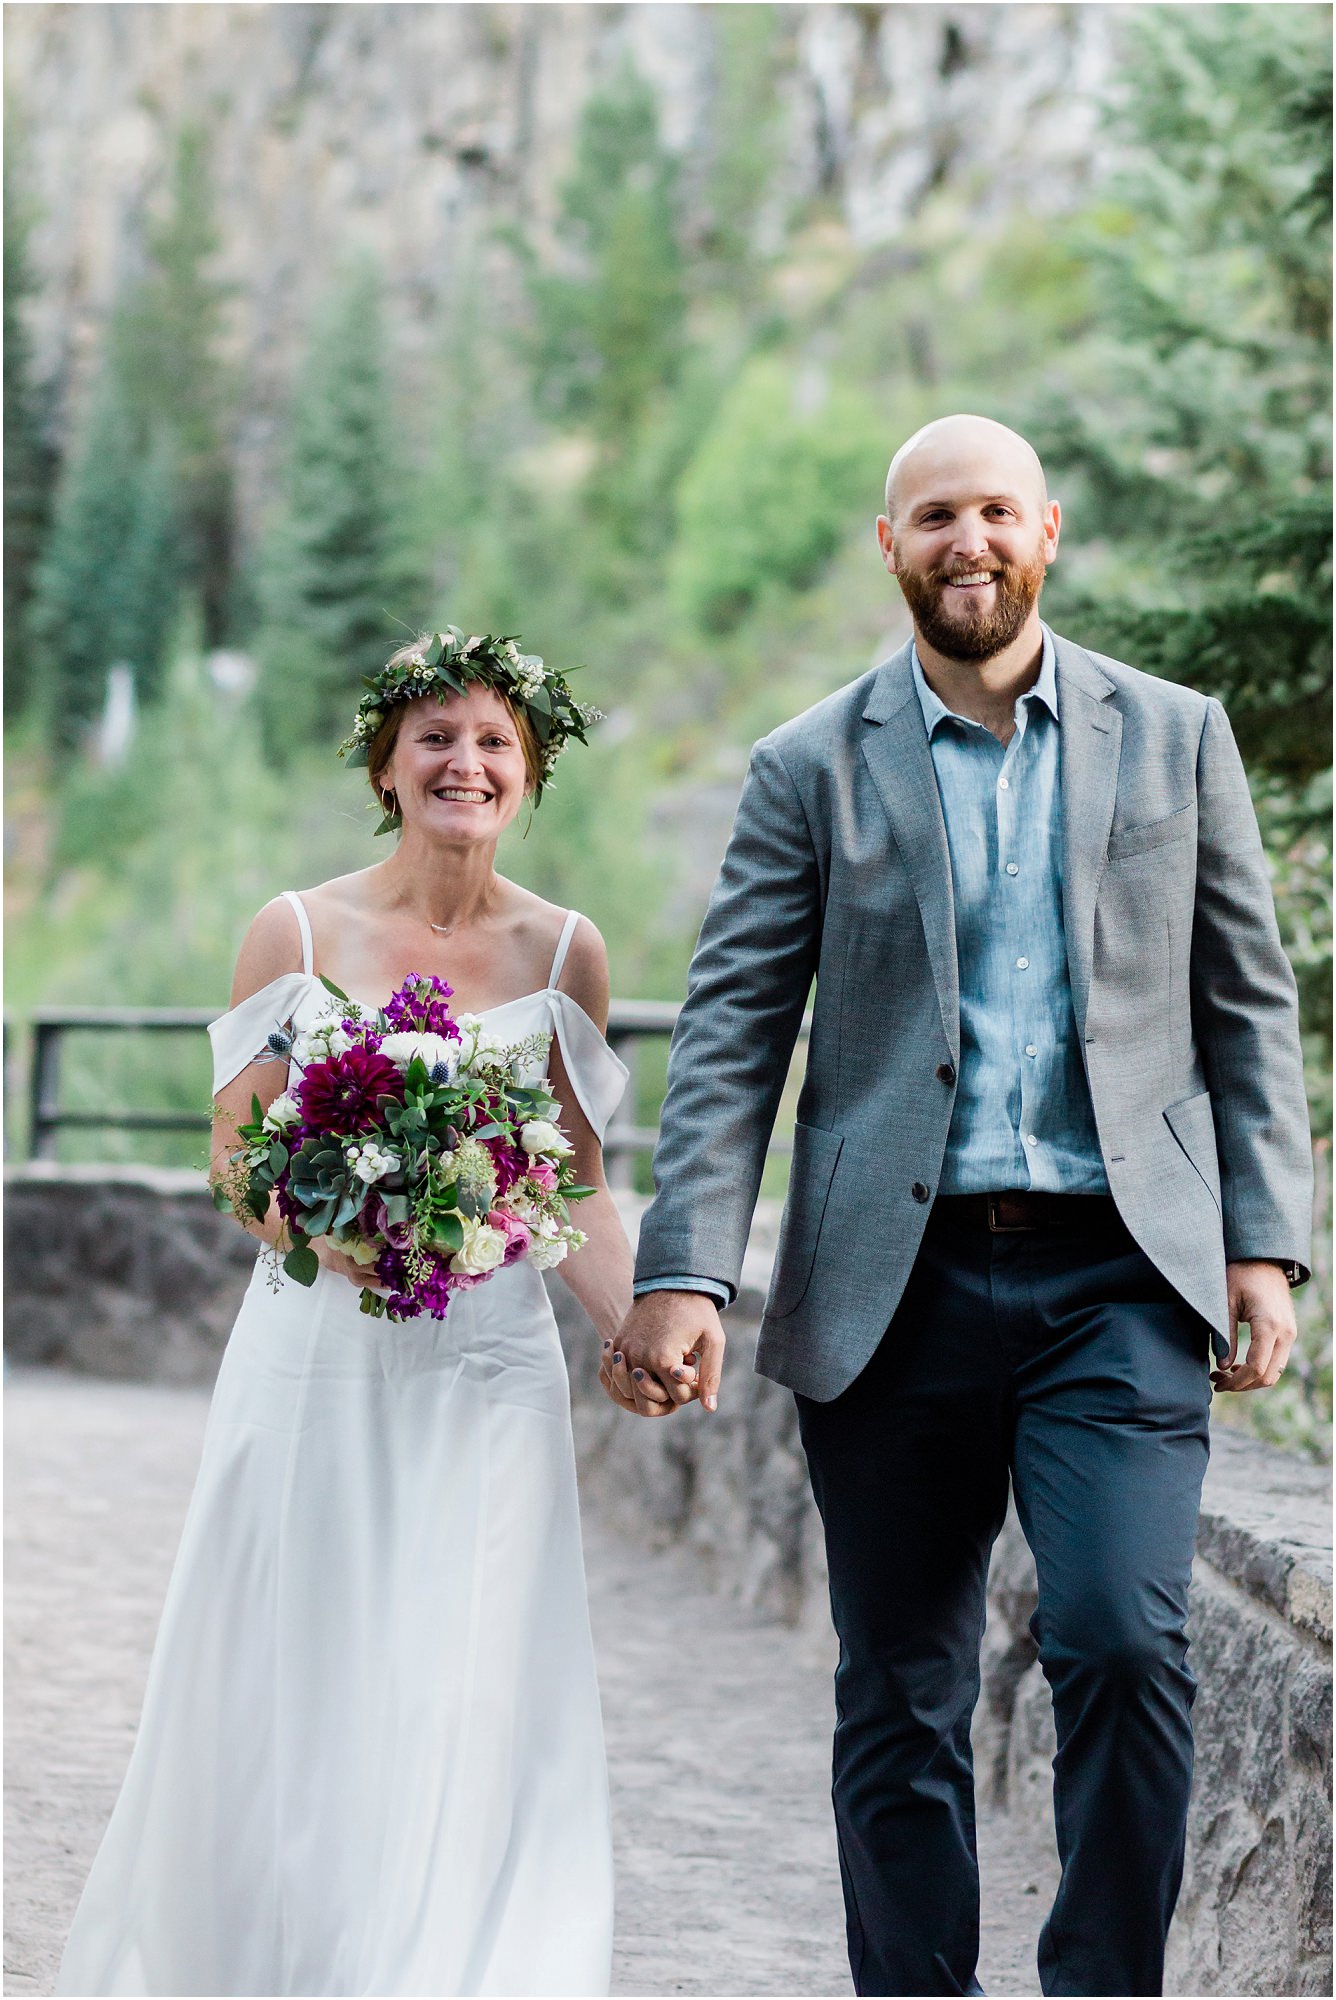 A bride wearing a floral crown and a gorgeous succulent bouquet is smiling ear to ear as she walks with her groom after saying their wedding vows at this waterfall elopement in Bend, Oregon. | Erica Swantek Photography